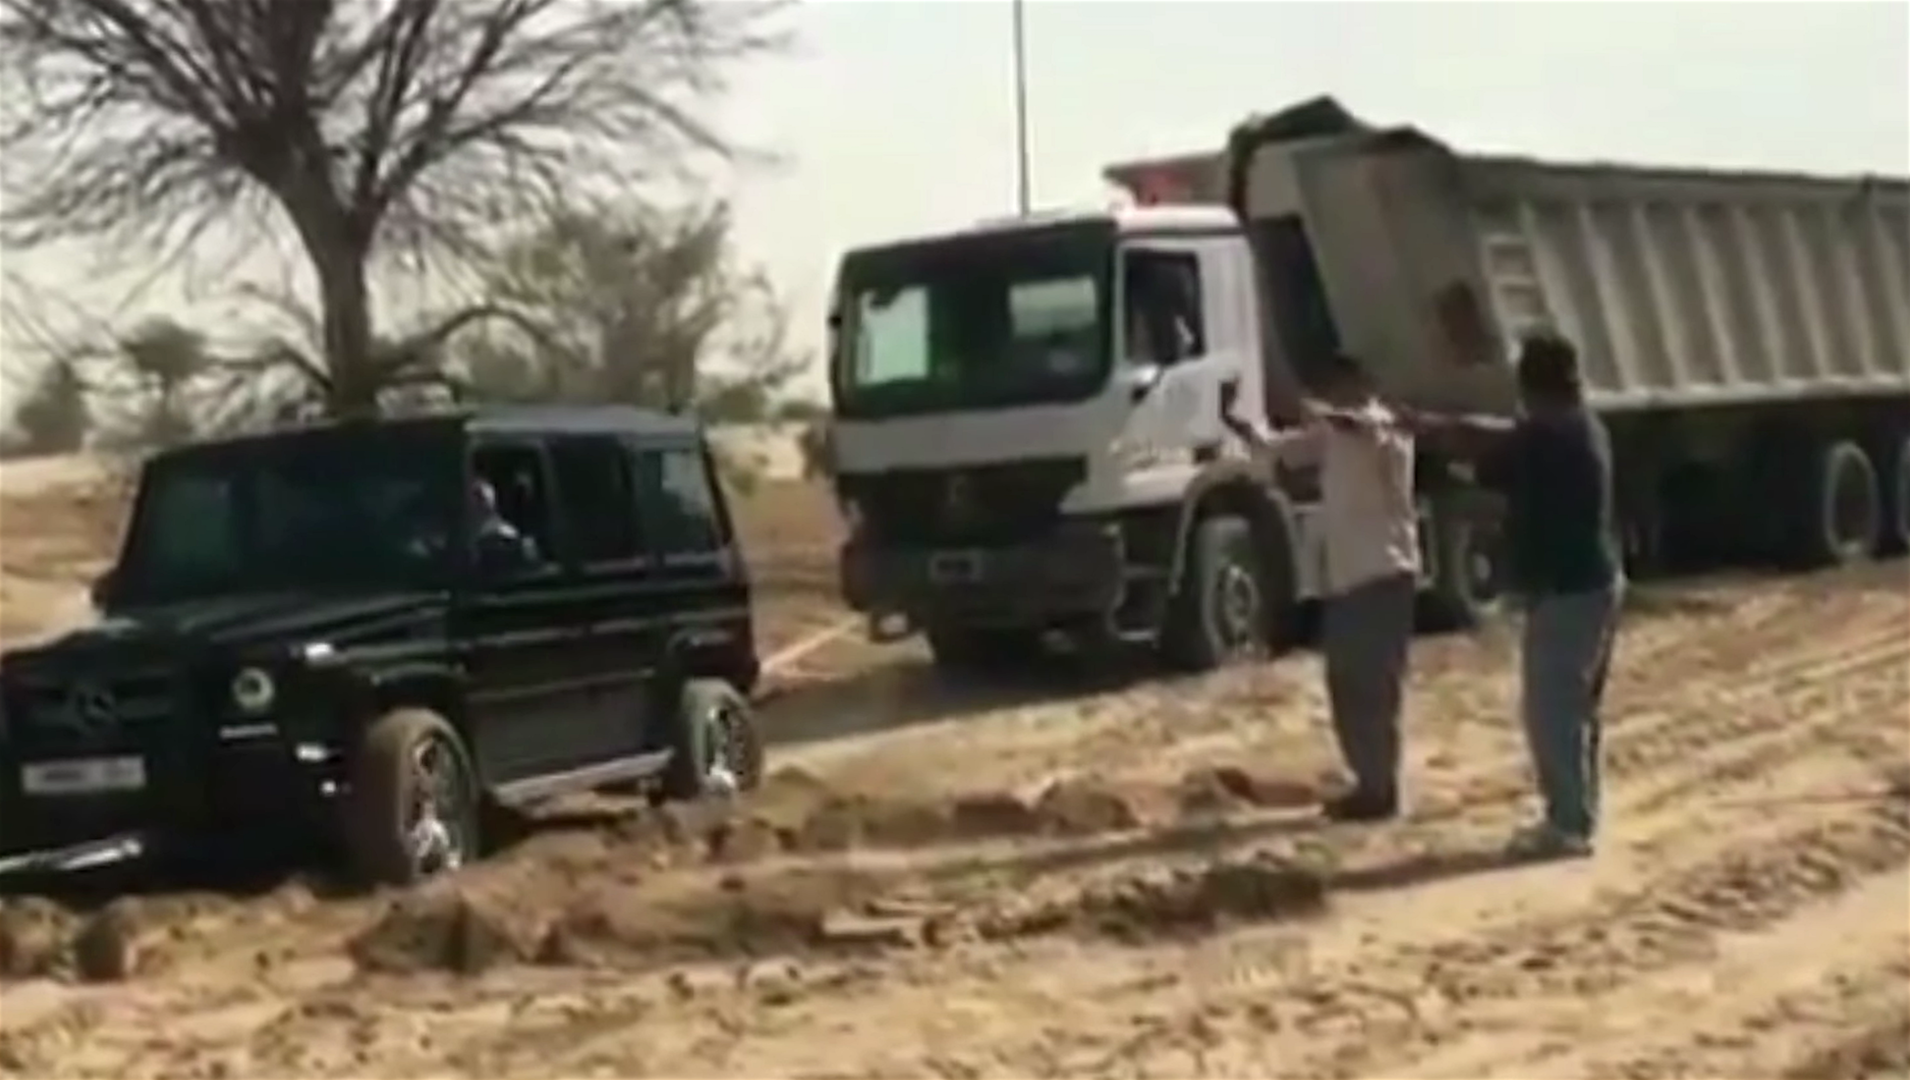 Watch a Dubai Prince Use a Mercedes-Benz G-Wagen to Tow a Truck From the Sand